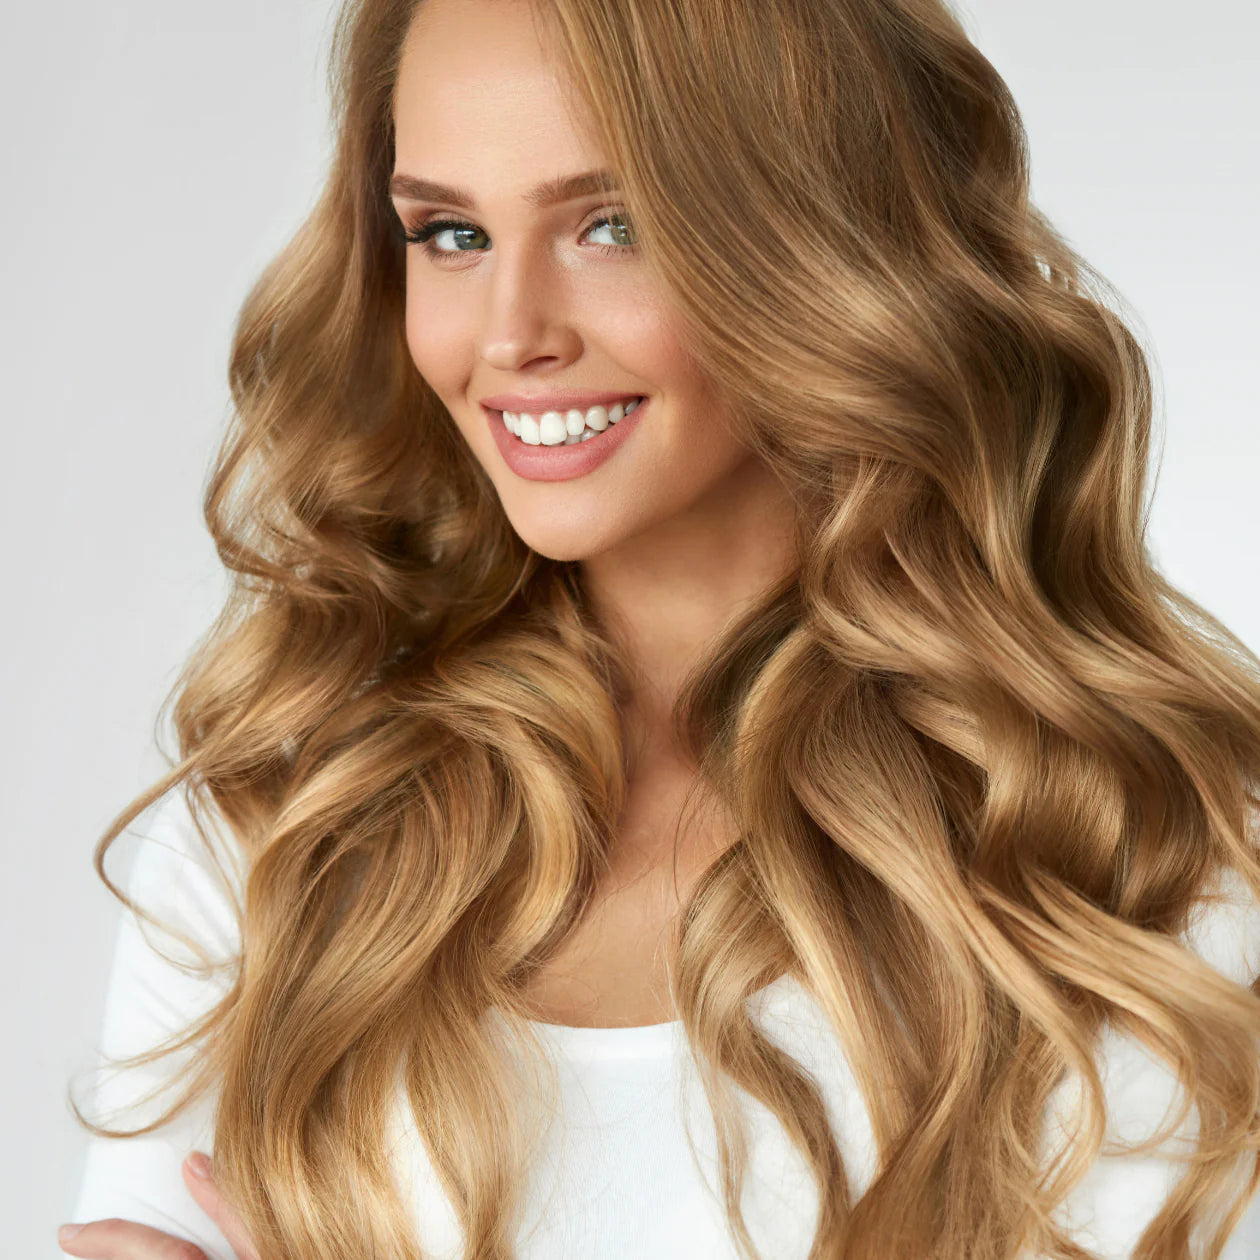 5 Mistakes to Avoid If You Want Your Thin Hair to Look Voluminous